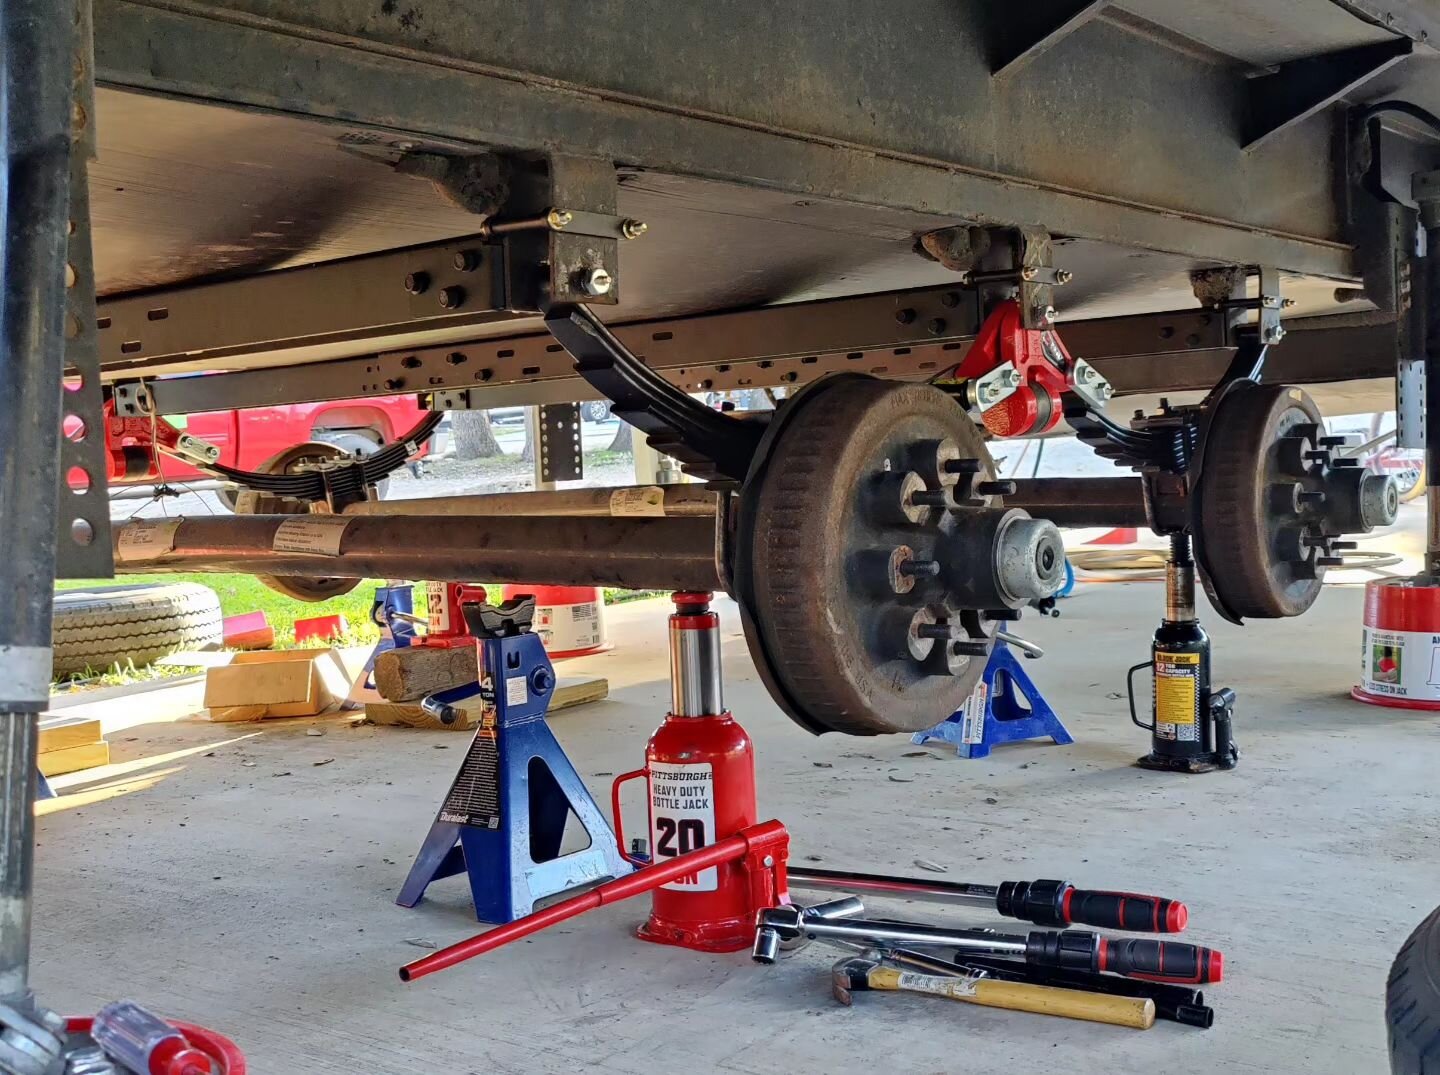 I'm excited about our suspension upgrades to our RV that I recently performed with the help of my friend Sam.

#rv
#rvliving #rving #rvmaintenance #etrailer #morryde #dexteraxles #RVLife #rvlifestyle